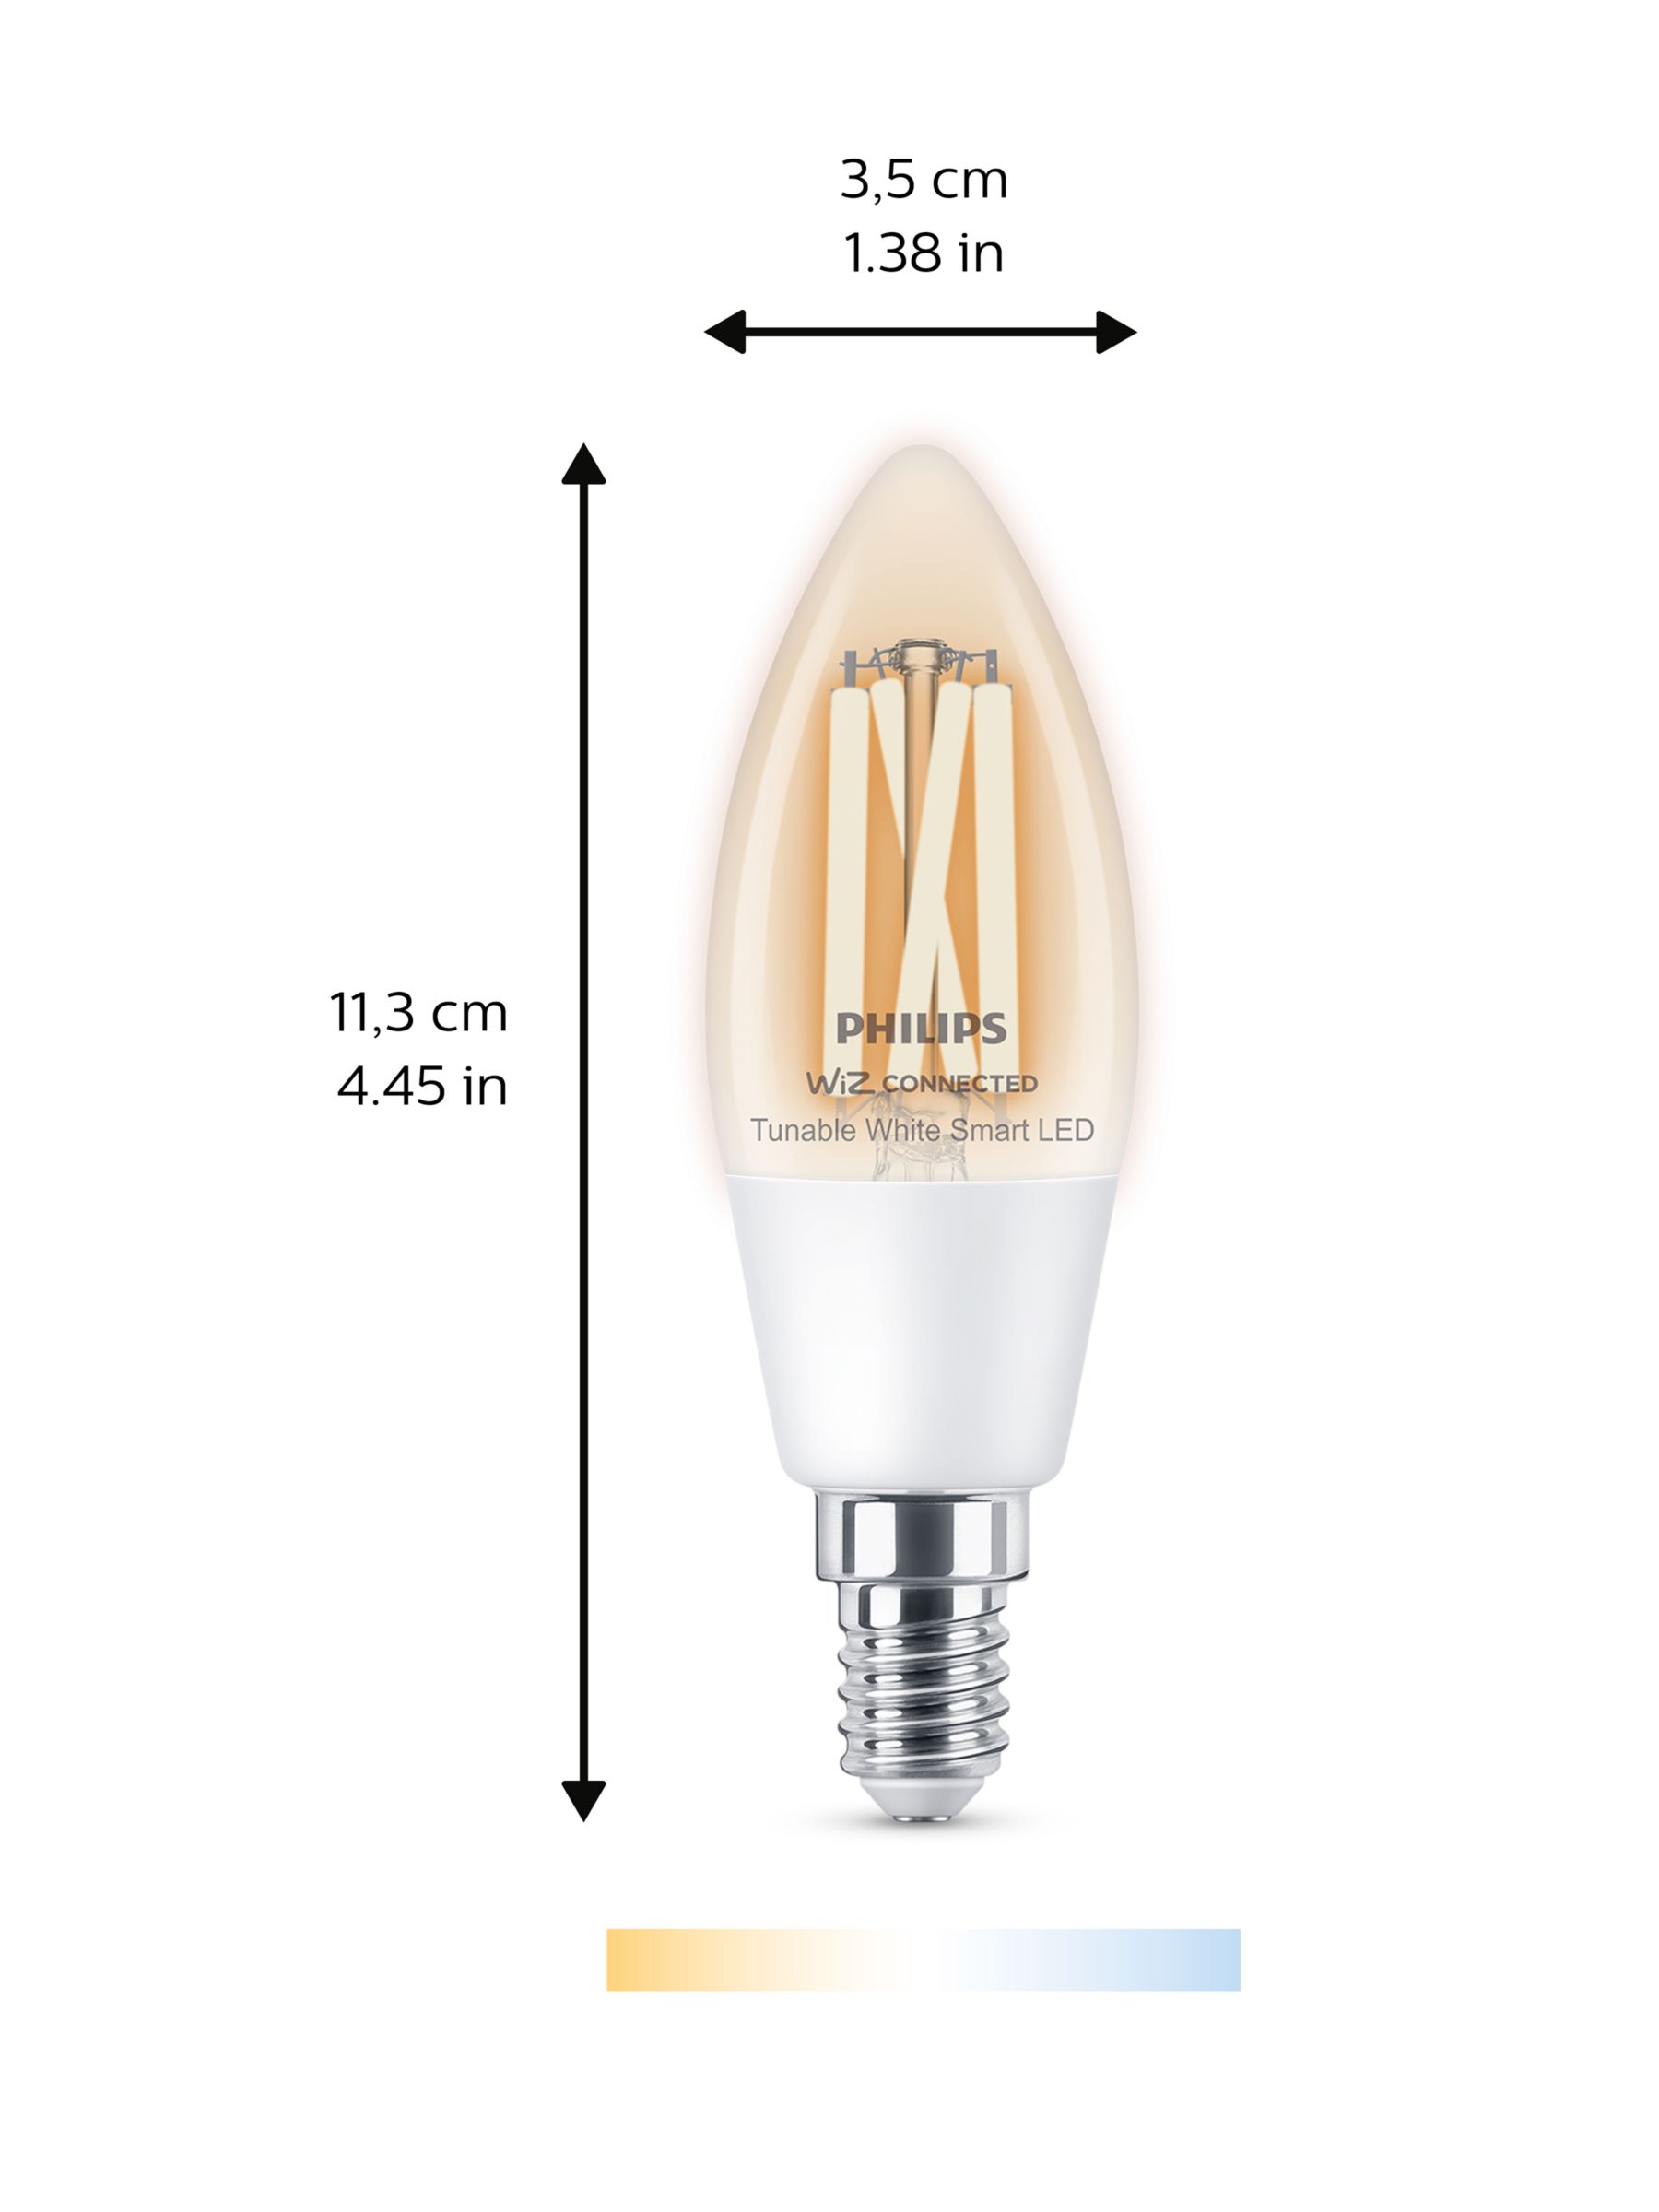 Philips Hue White and Colour Ambiance Wireless Lighting LED Colour Changing  Light Bulb with Bluetooth, 6.5W B39 E14 Small Edison Screw Bulb, Pack of 2